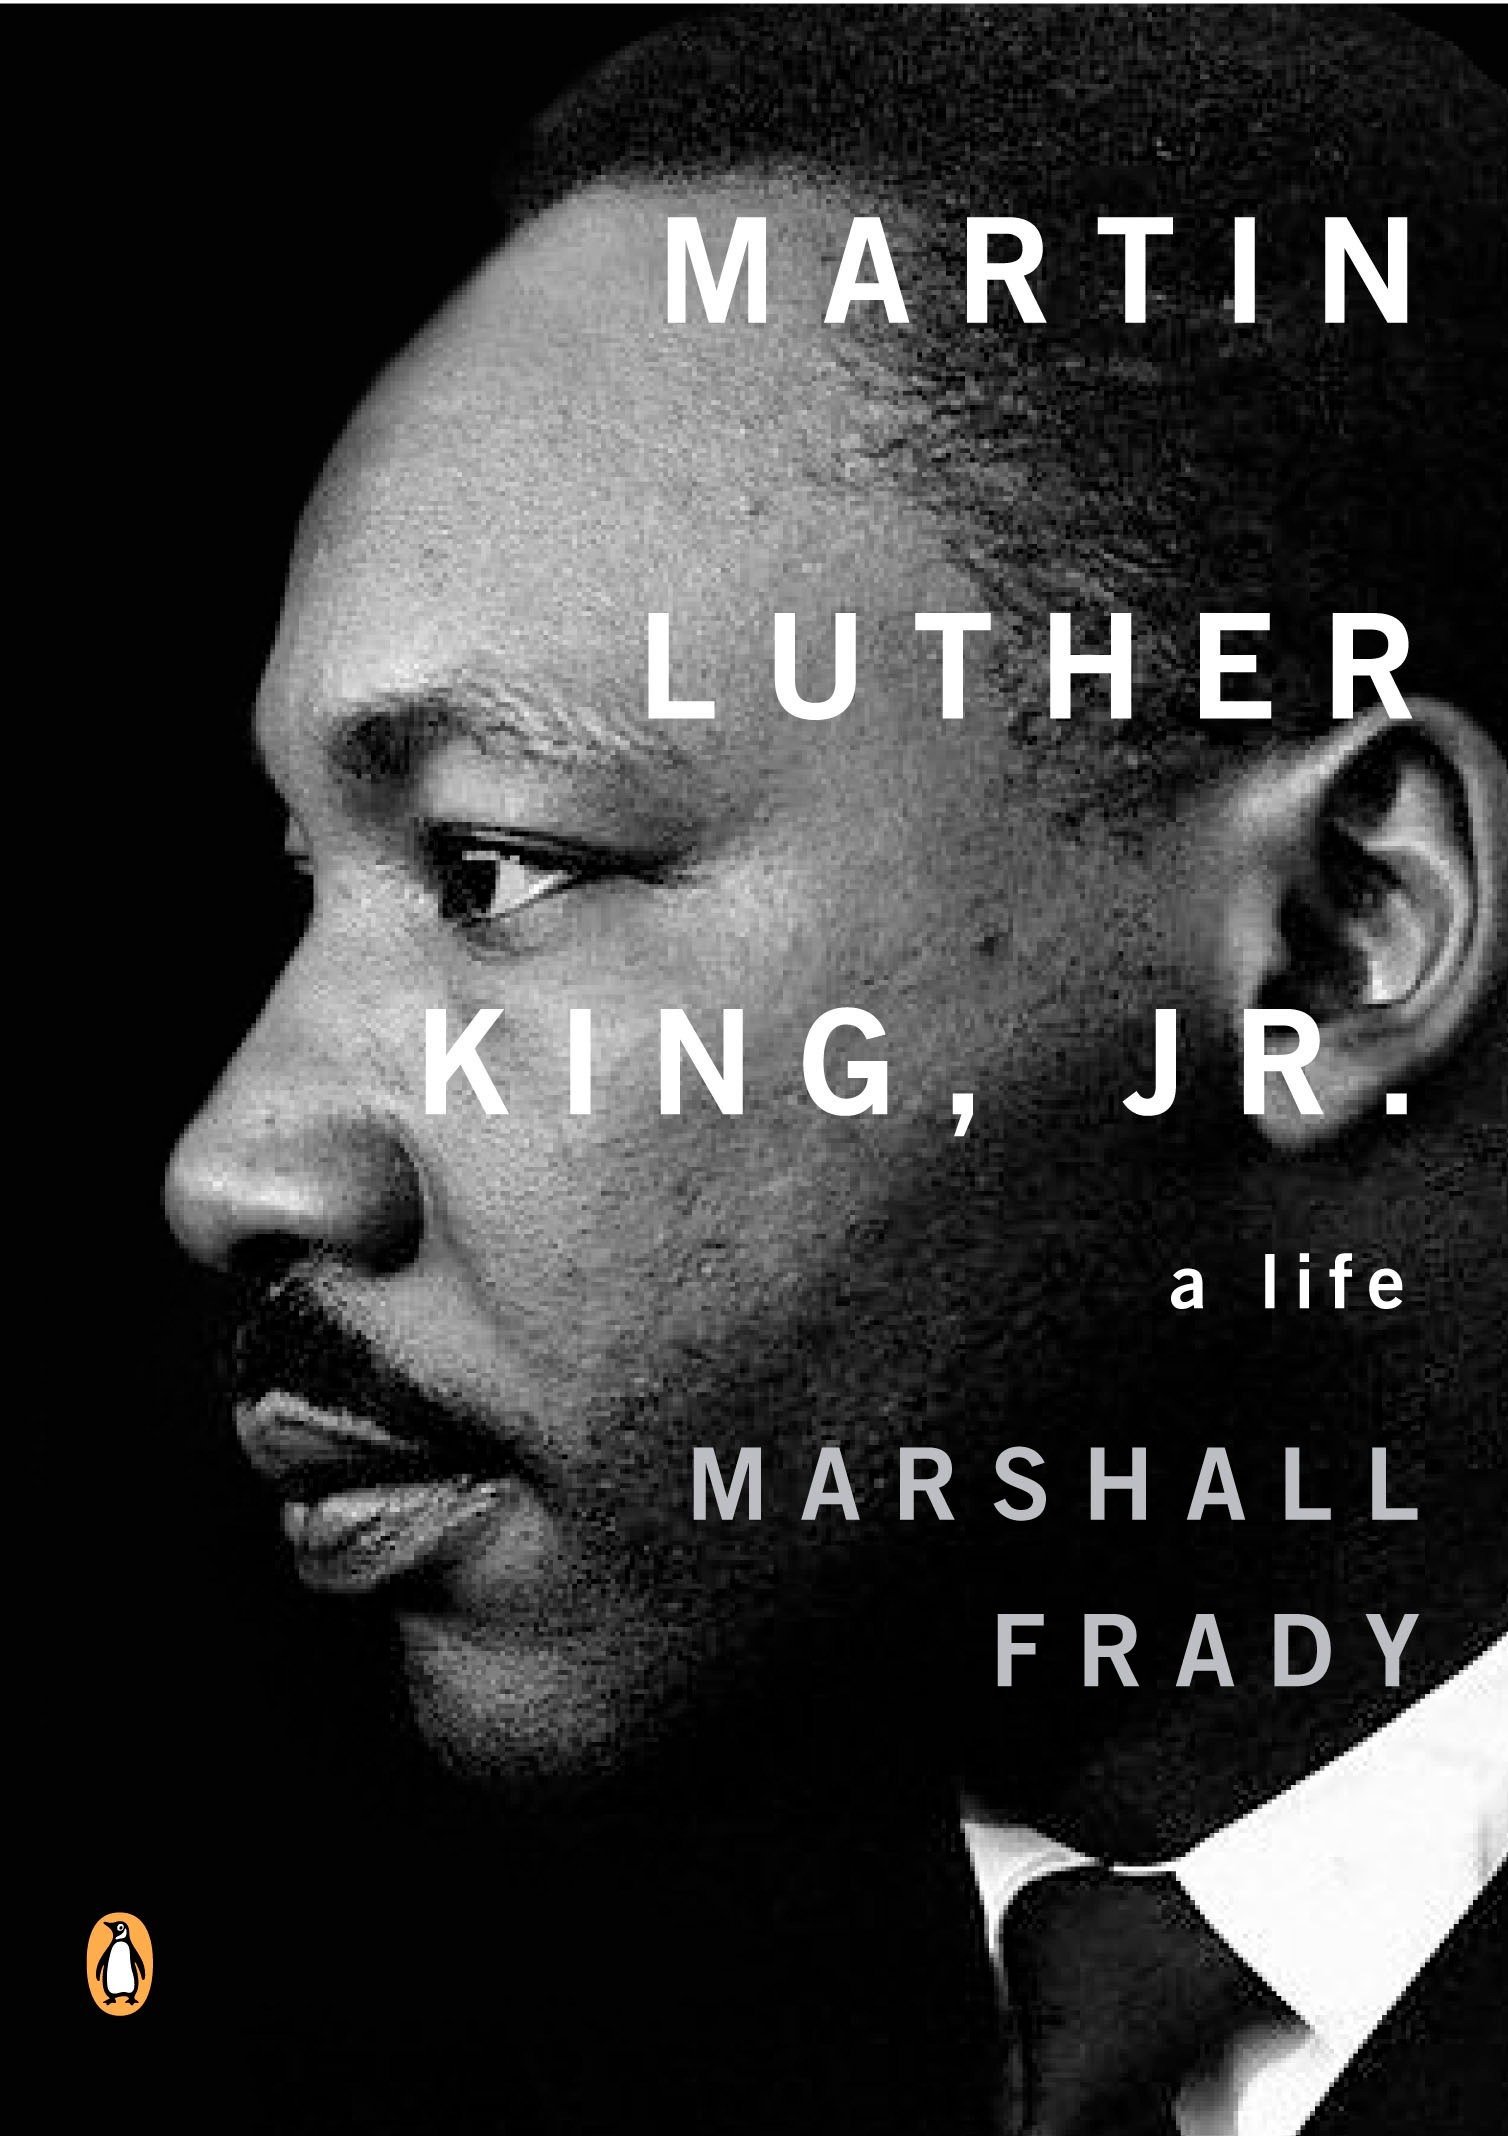 martin luther king jr quick biography